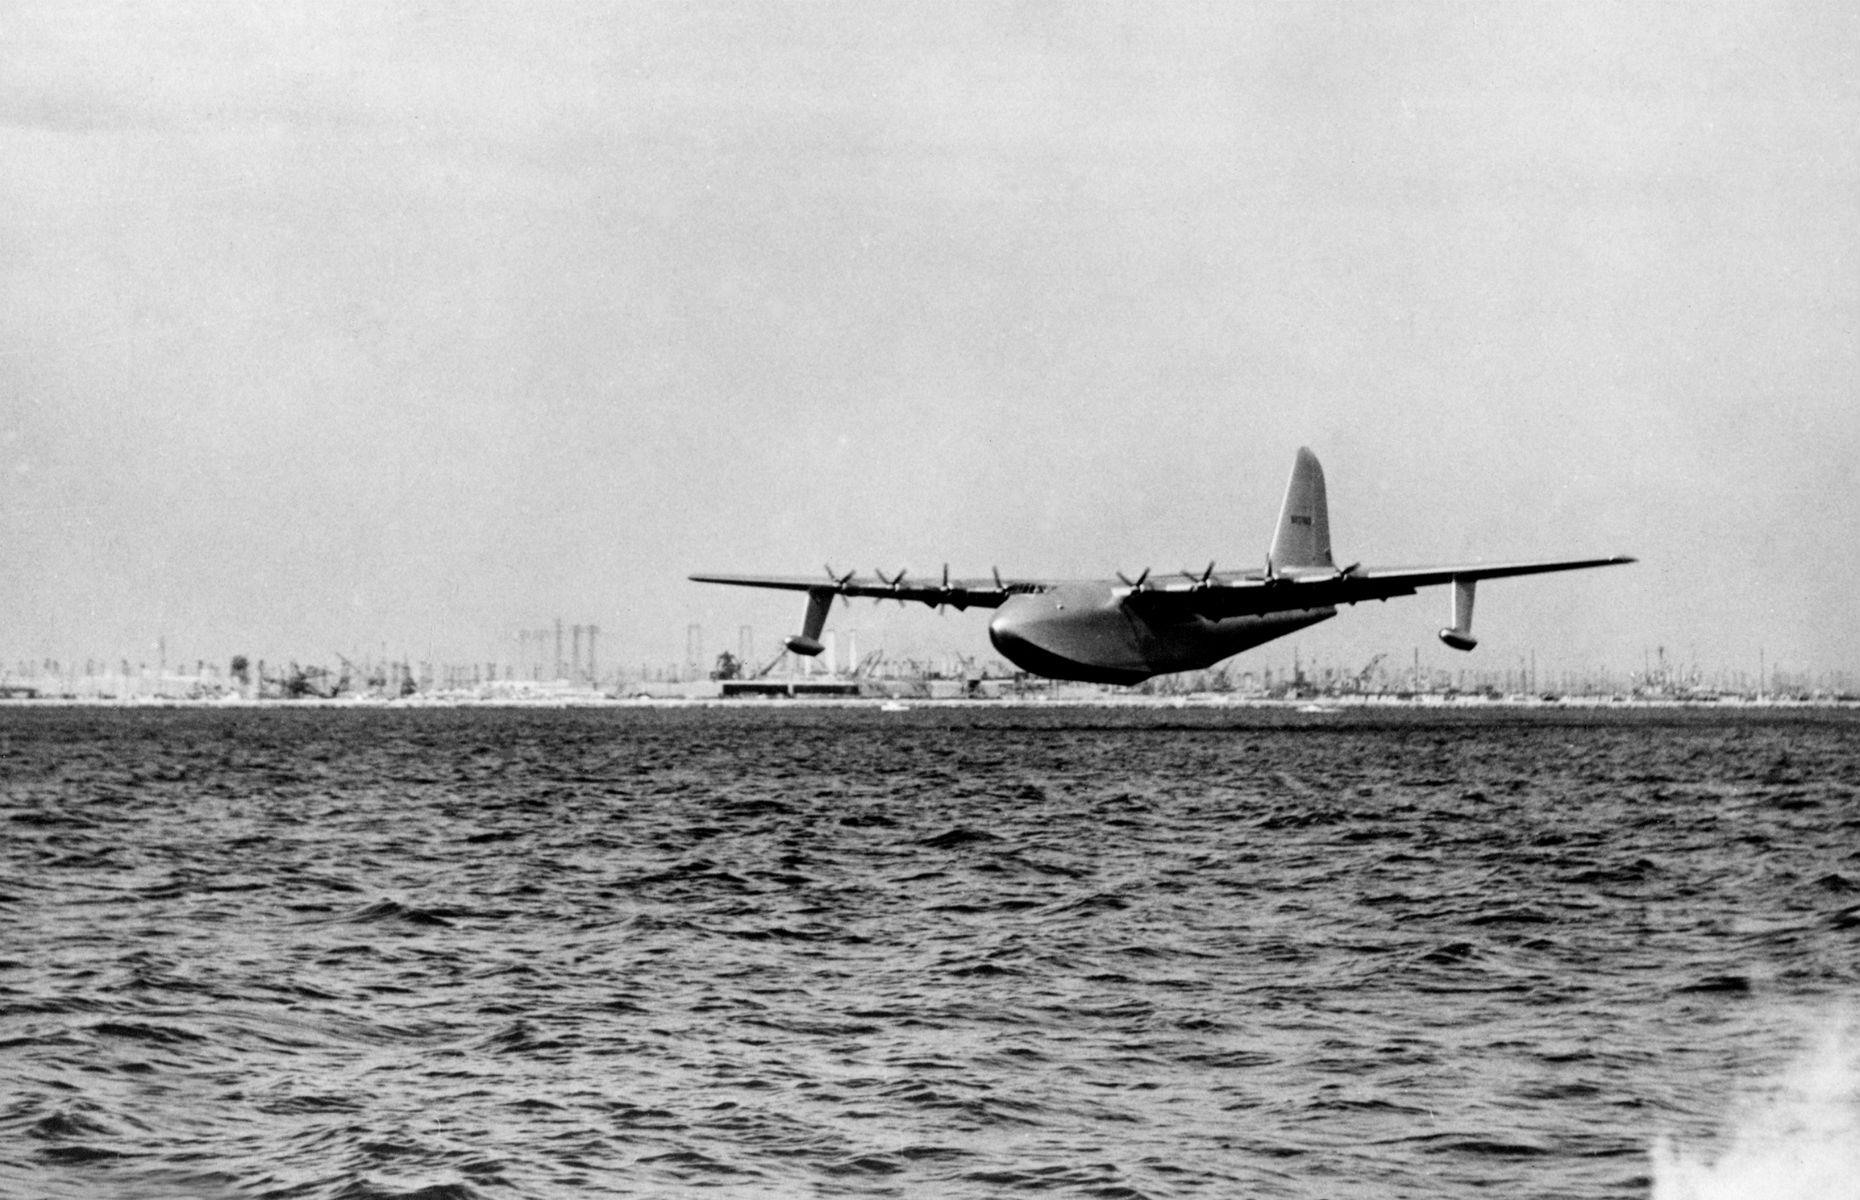 <p>The enormous craft made just one flight in November 1947. Hughes flew it over a mile at an altitude of 70 feet (21m) for one minute, with several journalists and crew on board, just to prove that the behemoth really could make it off the ground. The H-4 Hercules may have had a short shelf life, but Hughes was not prepared to let it waste away. The plane was kept in perfect condition and maintained by a full staff – to the point that it was always ready to fly until Hughes died in 1976.</p>